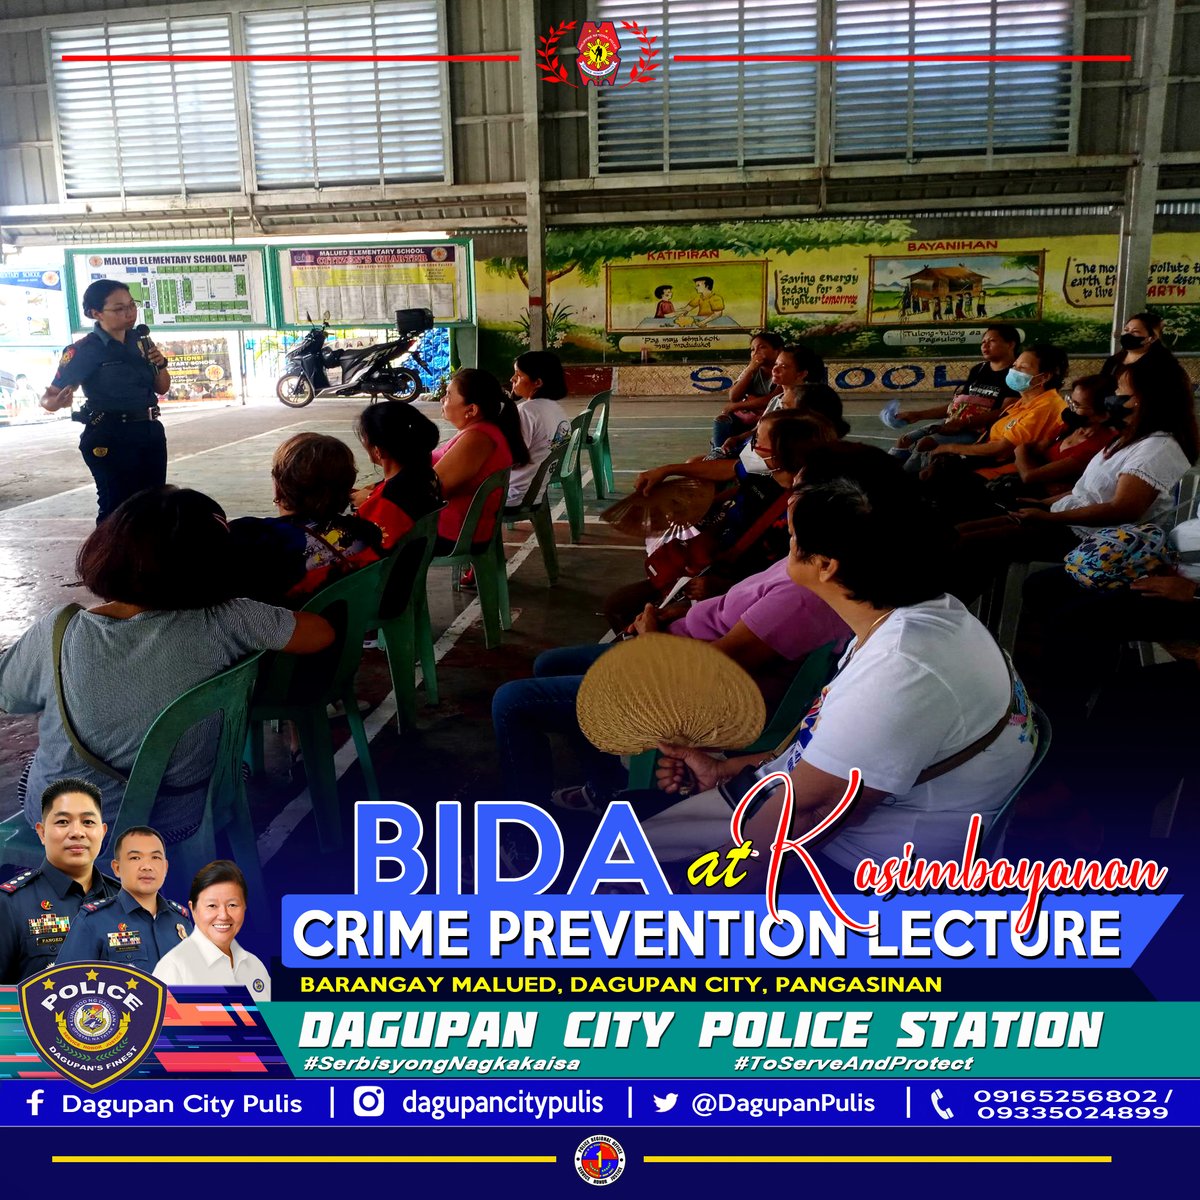 PCpl Dina D Arcega of Dagupan CPS, under the supervision of PLTCOL BRENDON B PALISOC, OIC, conducted lecture on Crime Prevention at the KASIMBAYANAN Weekly Interactive Meeting in Barangay Malued, Dagupan City. #SerbisyongNagkakaisa #ToServeandProtect #PCADGIlocosRegion